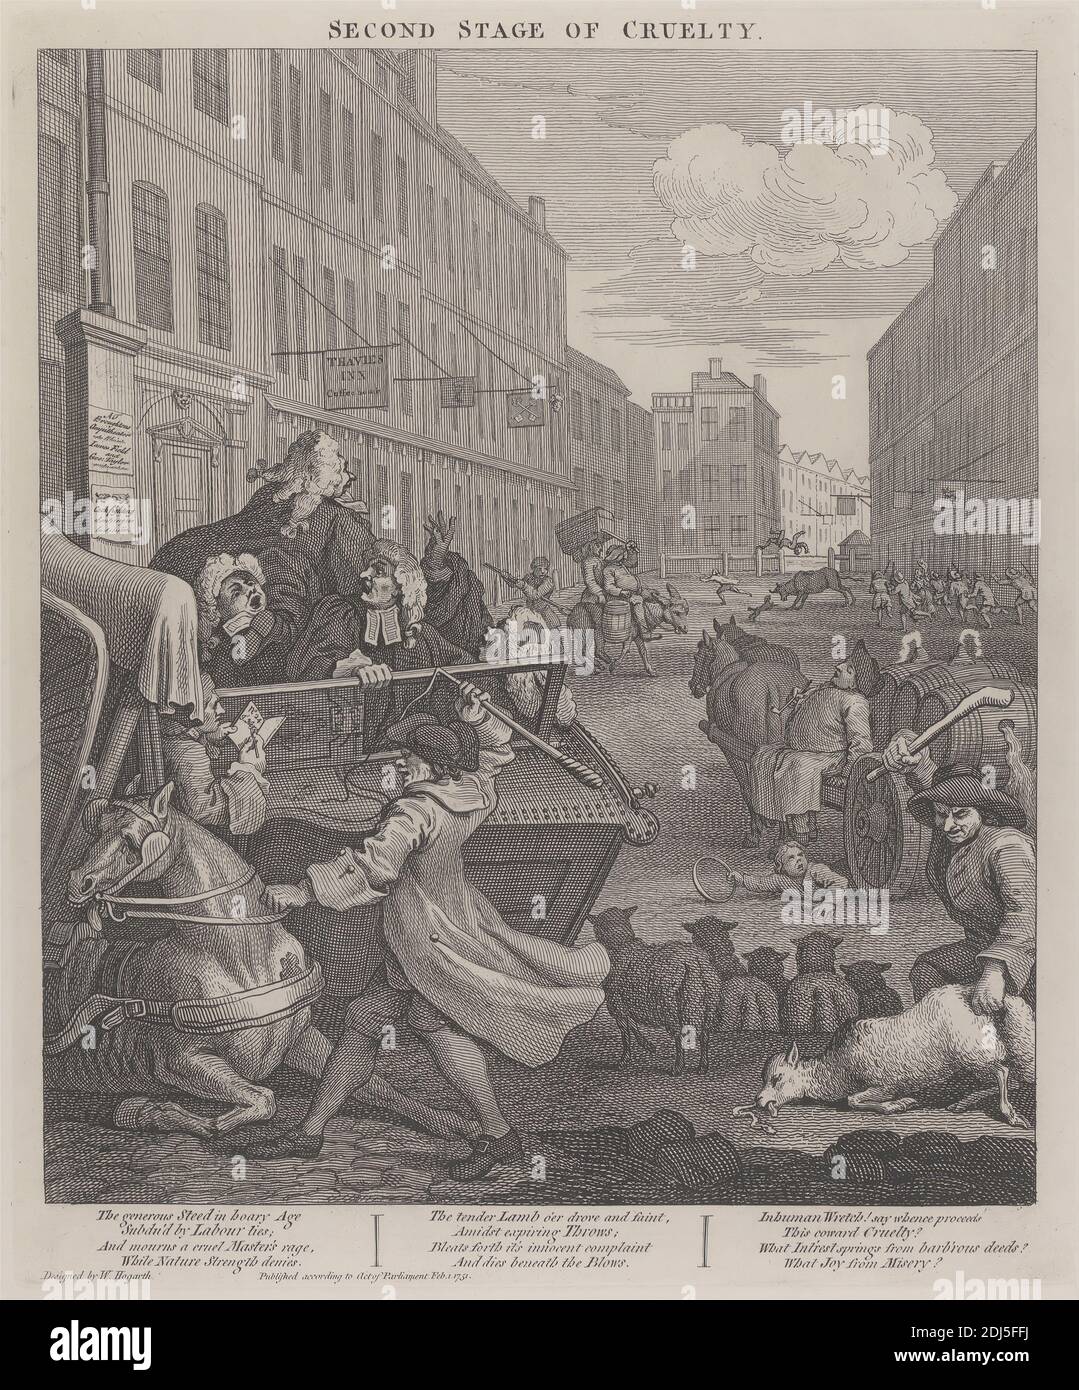 The Second Stage of Cruelty: Coachman Beating a Fallen Horse, Print made by William Hogarth, 1697–1764, British, 1751, printed 1790, Line engraving on thick, white, smooth wove paper, Sheet: 24 7/8 x 19 1/4 inches (63.2 x 48.9 cm), Plate: 15 1/4 x 12 3/4 inches (38.7 x 32.4 cm), and Image: 13 3/4 x 11 7/8 inches (34.9 x 30.2 cm), barrels, bull, cart, cityscape, coach, coachman, cruelty, donkey, genre subject, greed, horse (animal), inn, lawyers, men, sheep, signs, street, tavern, torture, violence, Welsh, England, Europe, London, United Kingdom Stock Photo